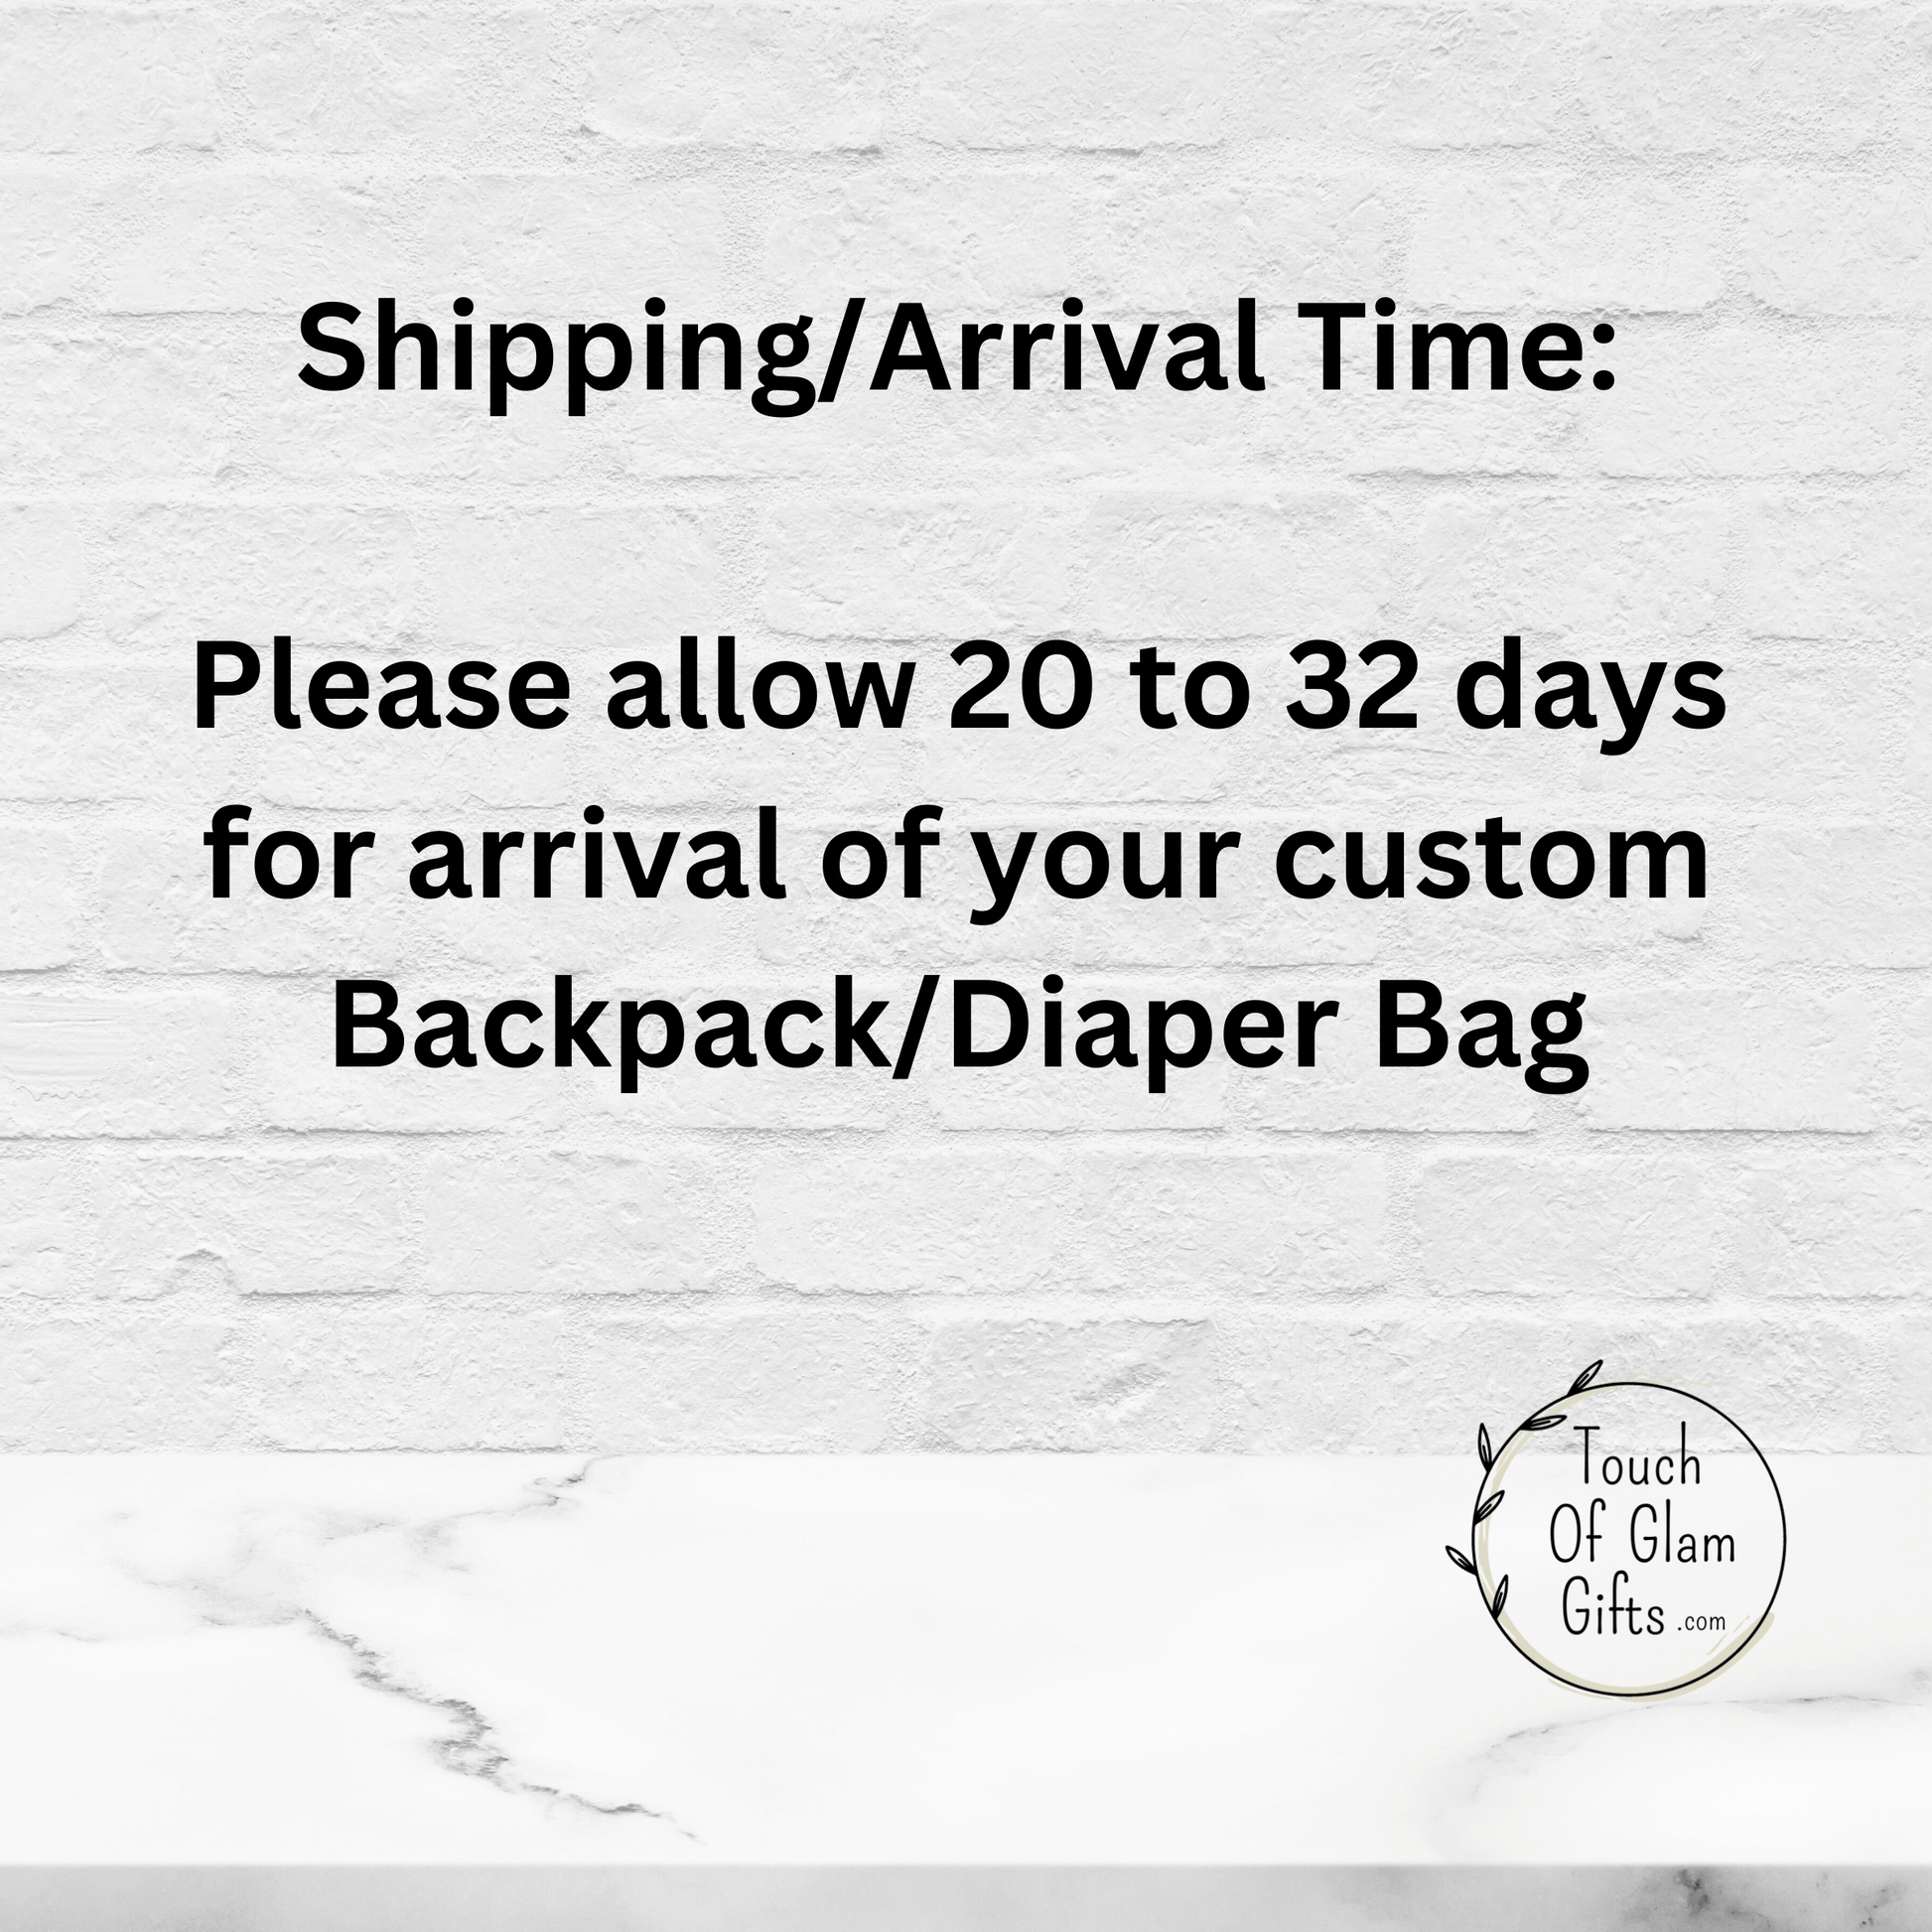 Please allow twenty to thirty two days for the arrival of your custom diaper bag backpack.